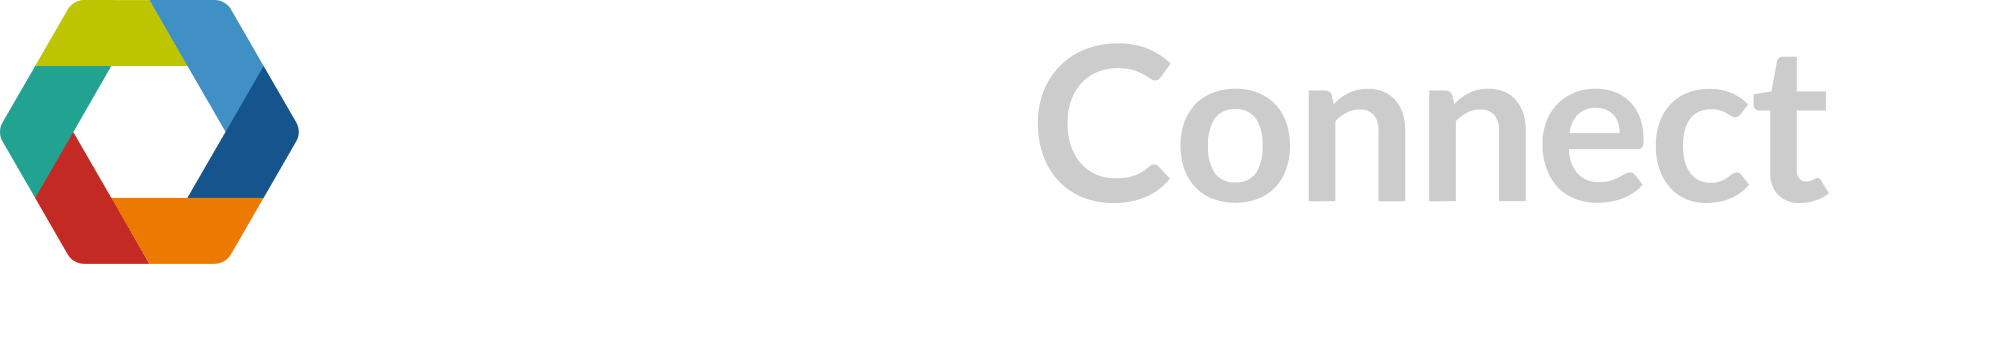 IntegraConnect